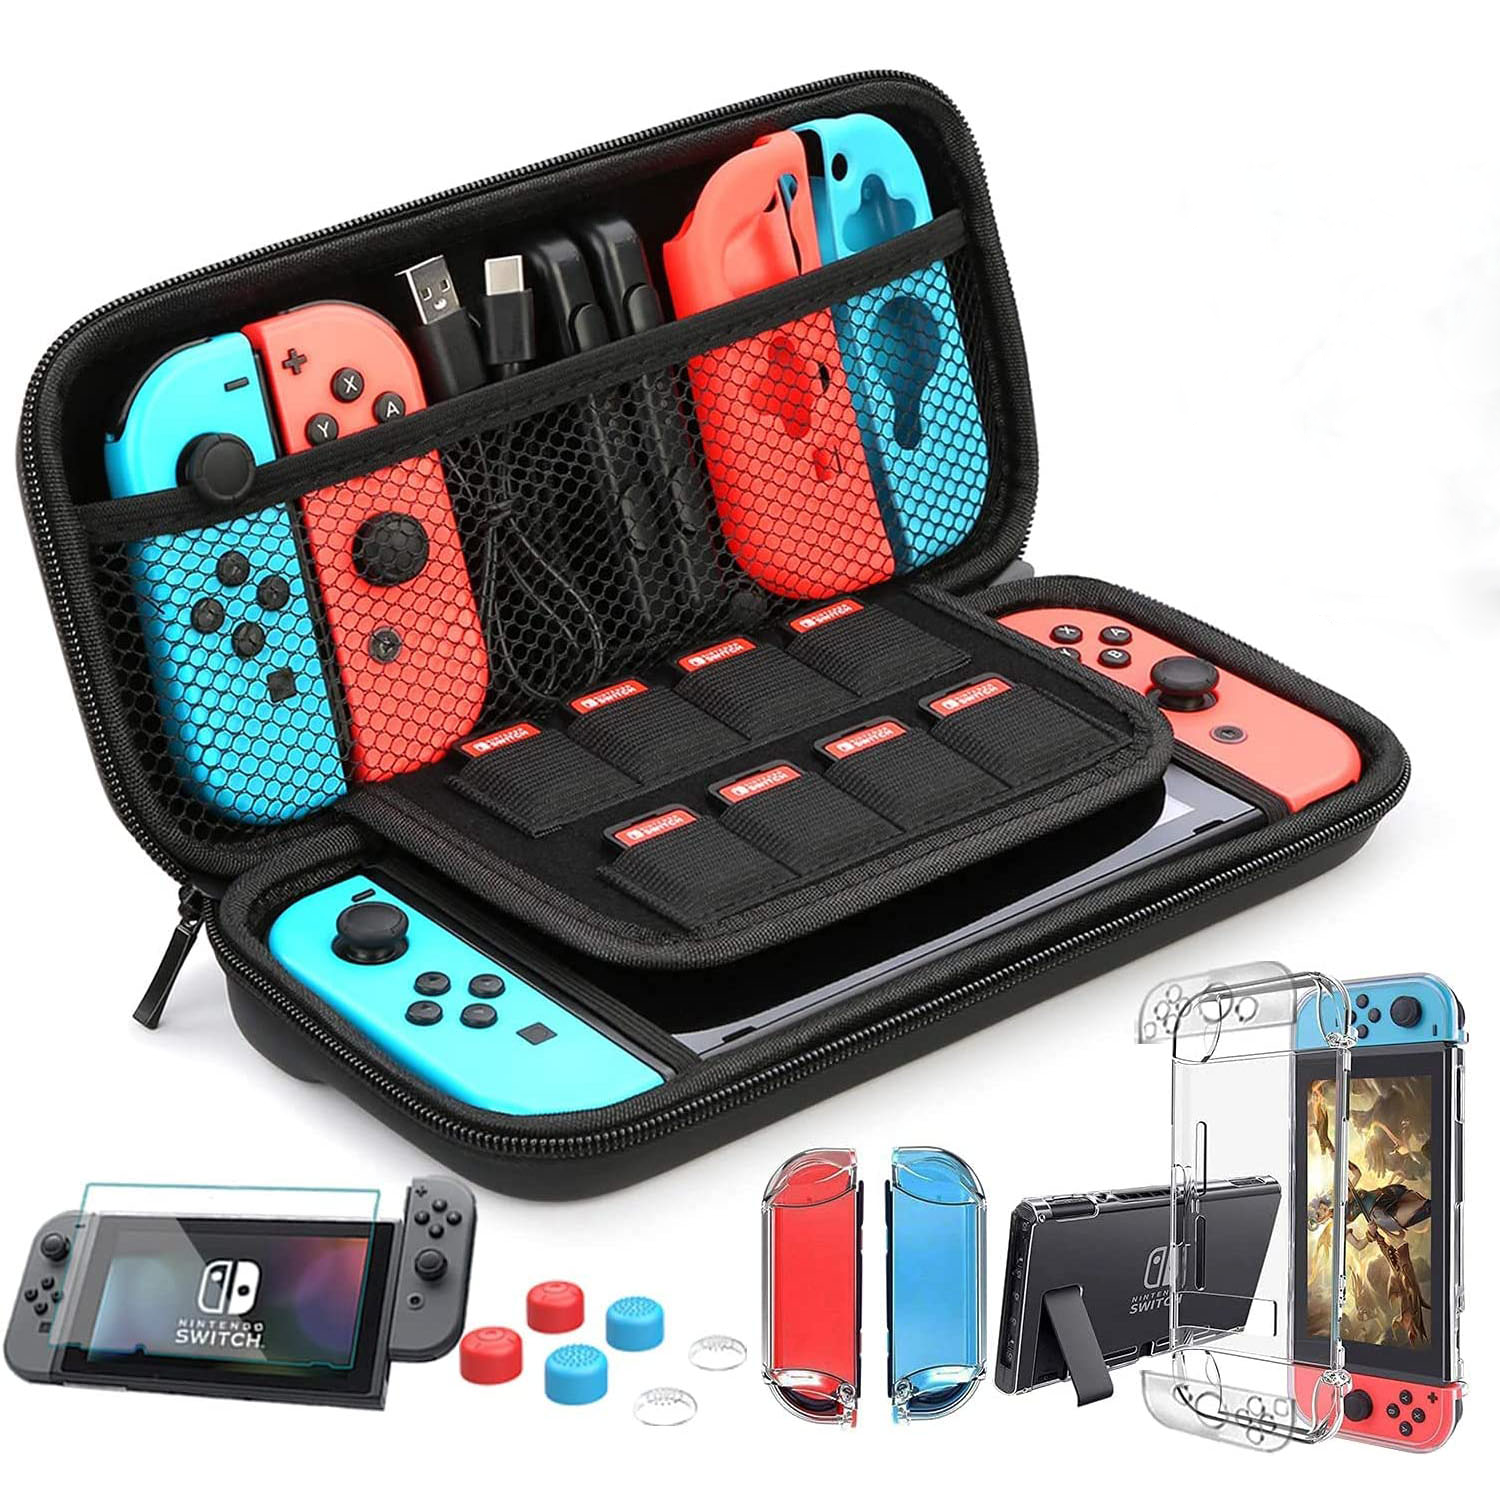 The Bigly Brothers Nintendo Switch Case, 9 in 1 Accessories Kit with 6pcs Thumb Grips Caps, HD Screen Protector, Dockable Protective Case and Carrying Case